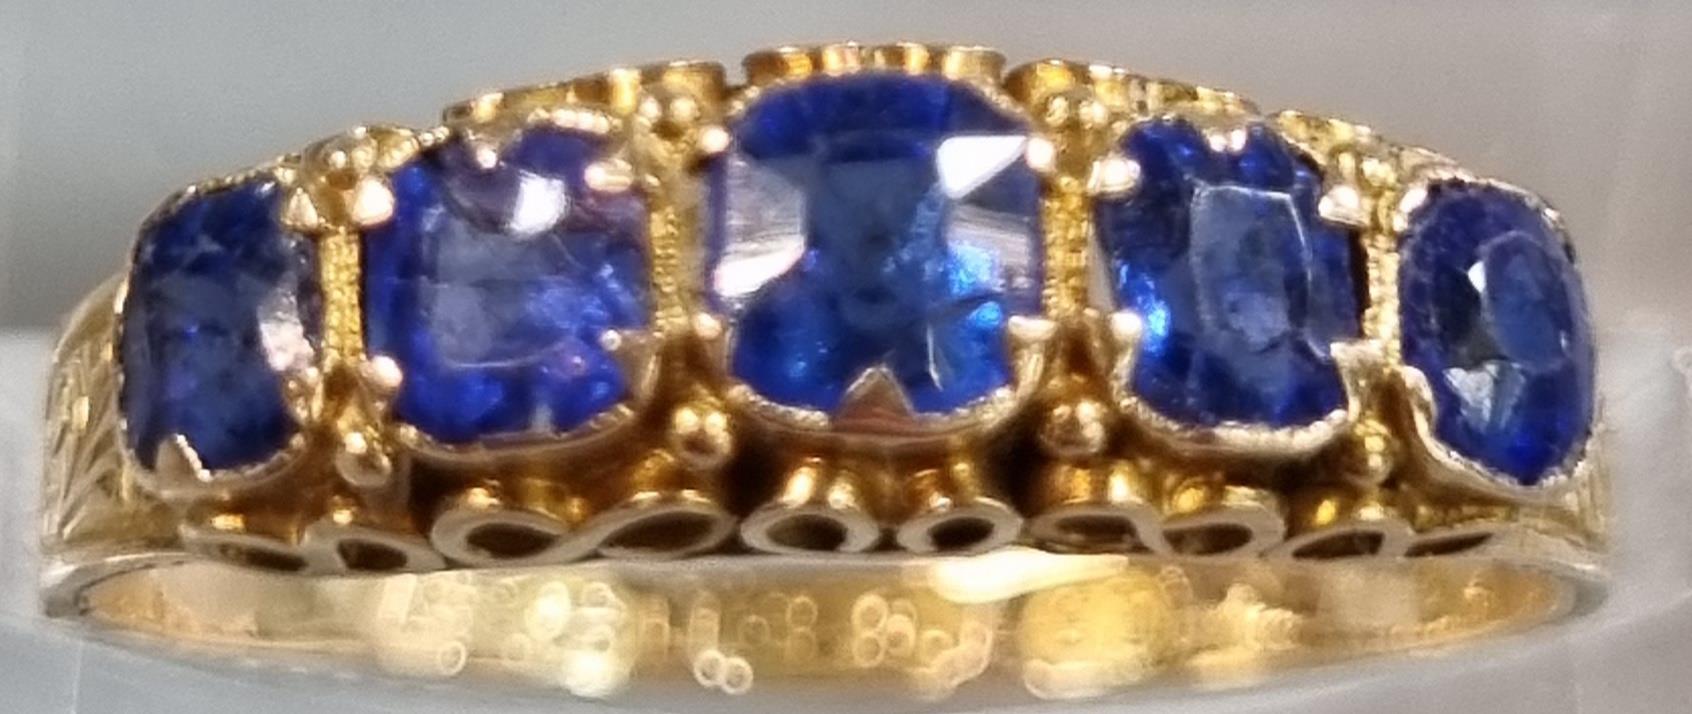 15ct gold Victorian ring set with five cornflower blue sapphires. 1.7g approx. Size L1/2. In antique - Image 2 of 6